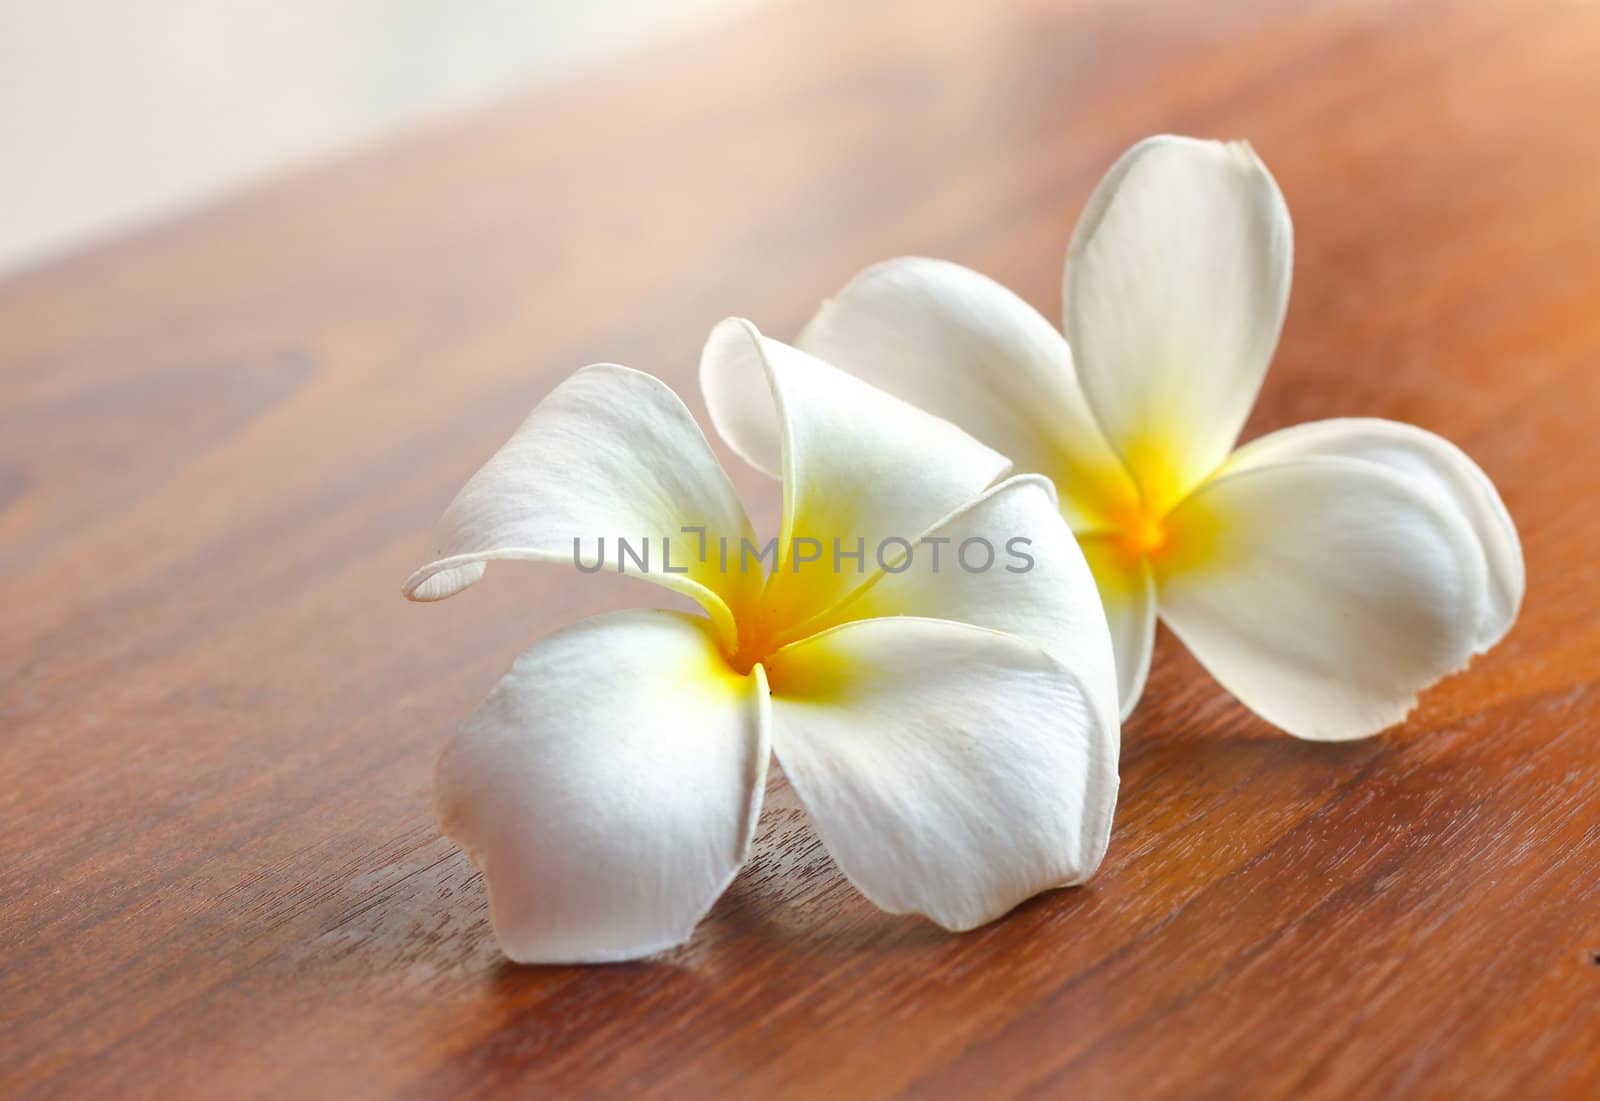 Frangipani flowers on the table  by nuchylee